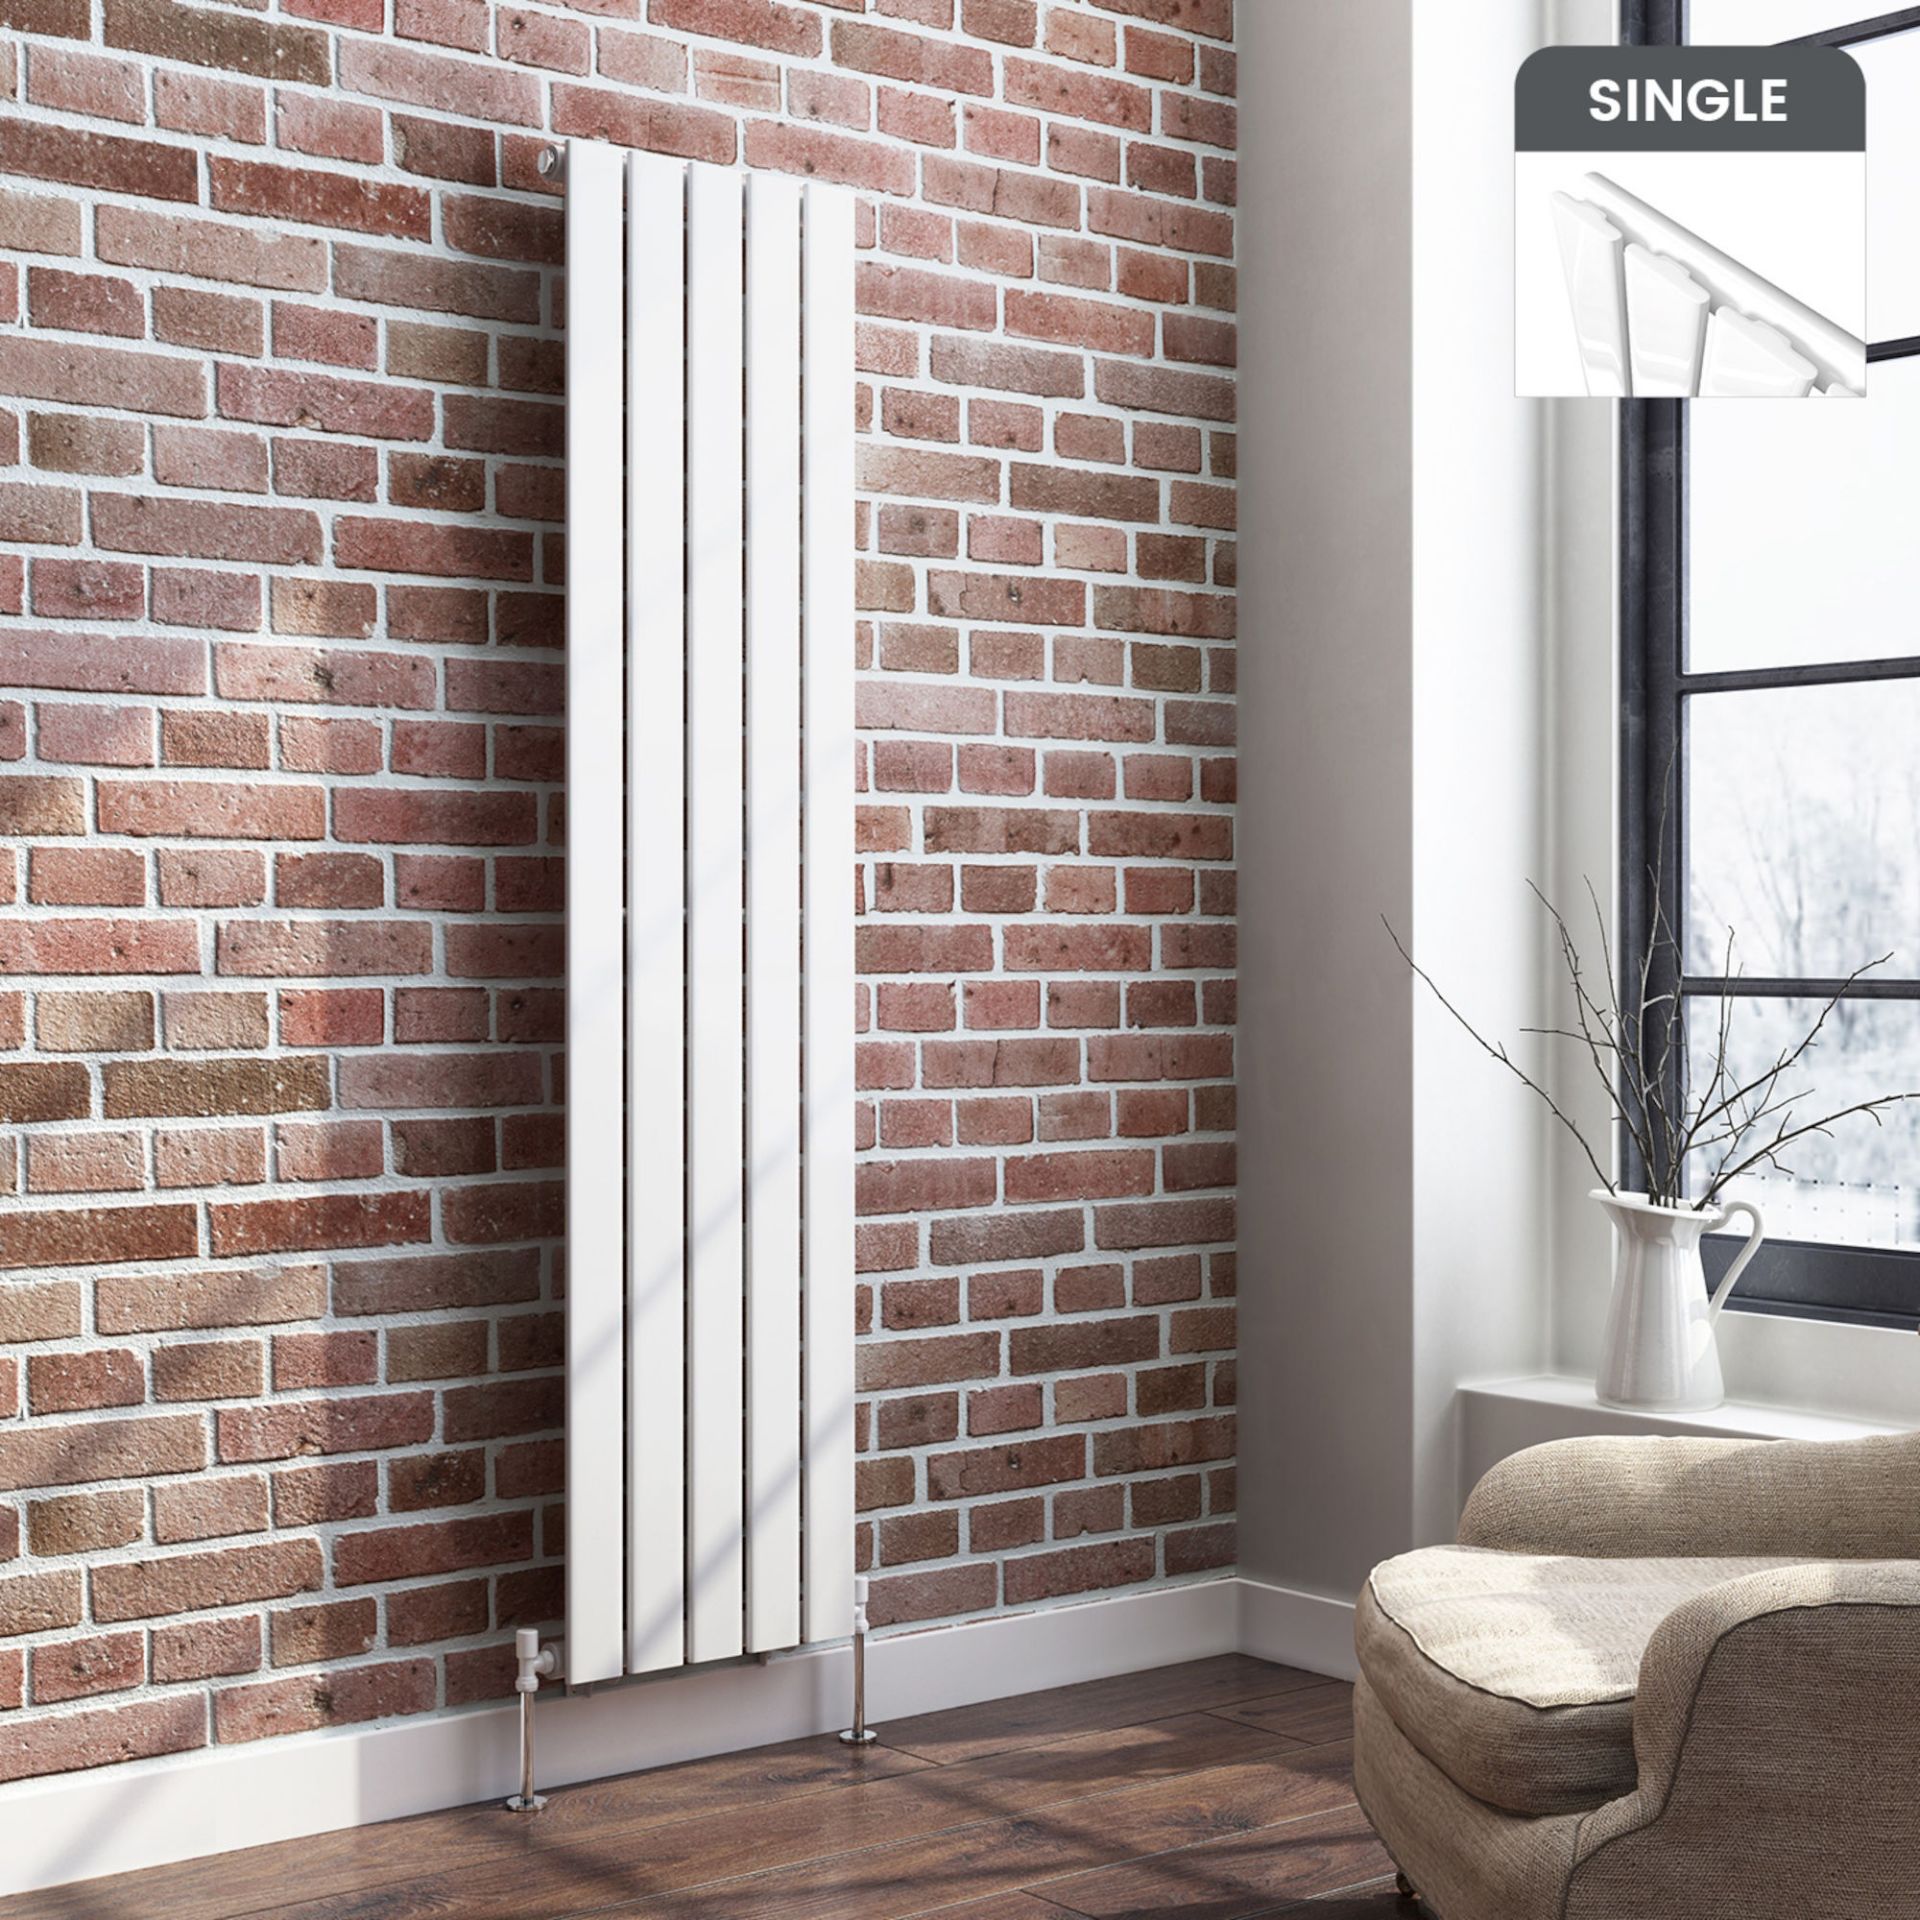 (XM210) 1600x376mm Gloss White Single Flat Panel Vertical Radiator. RRP £249.99. Made from low